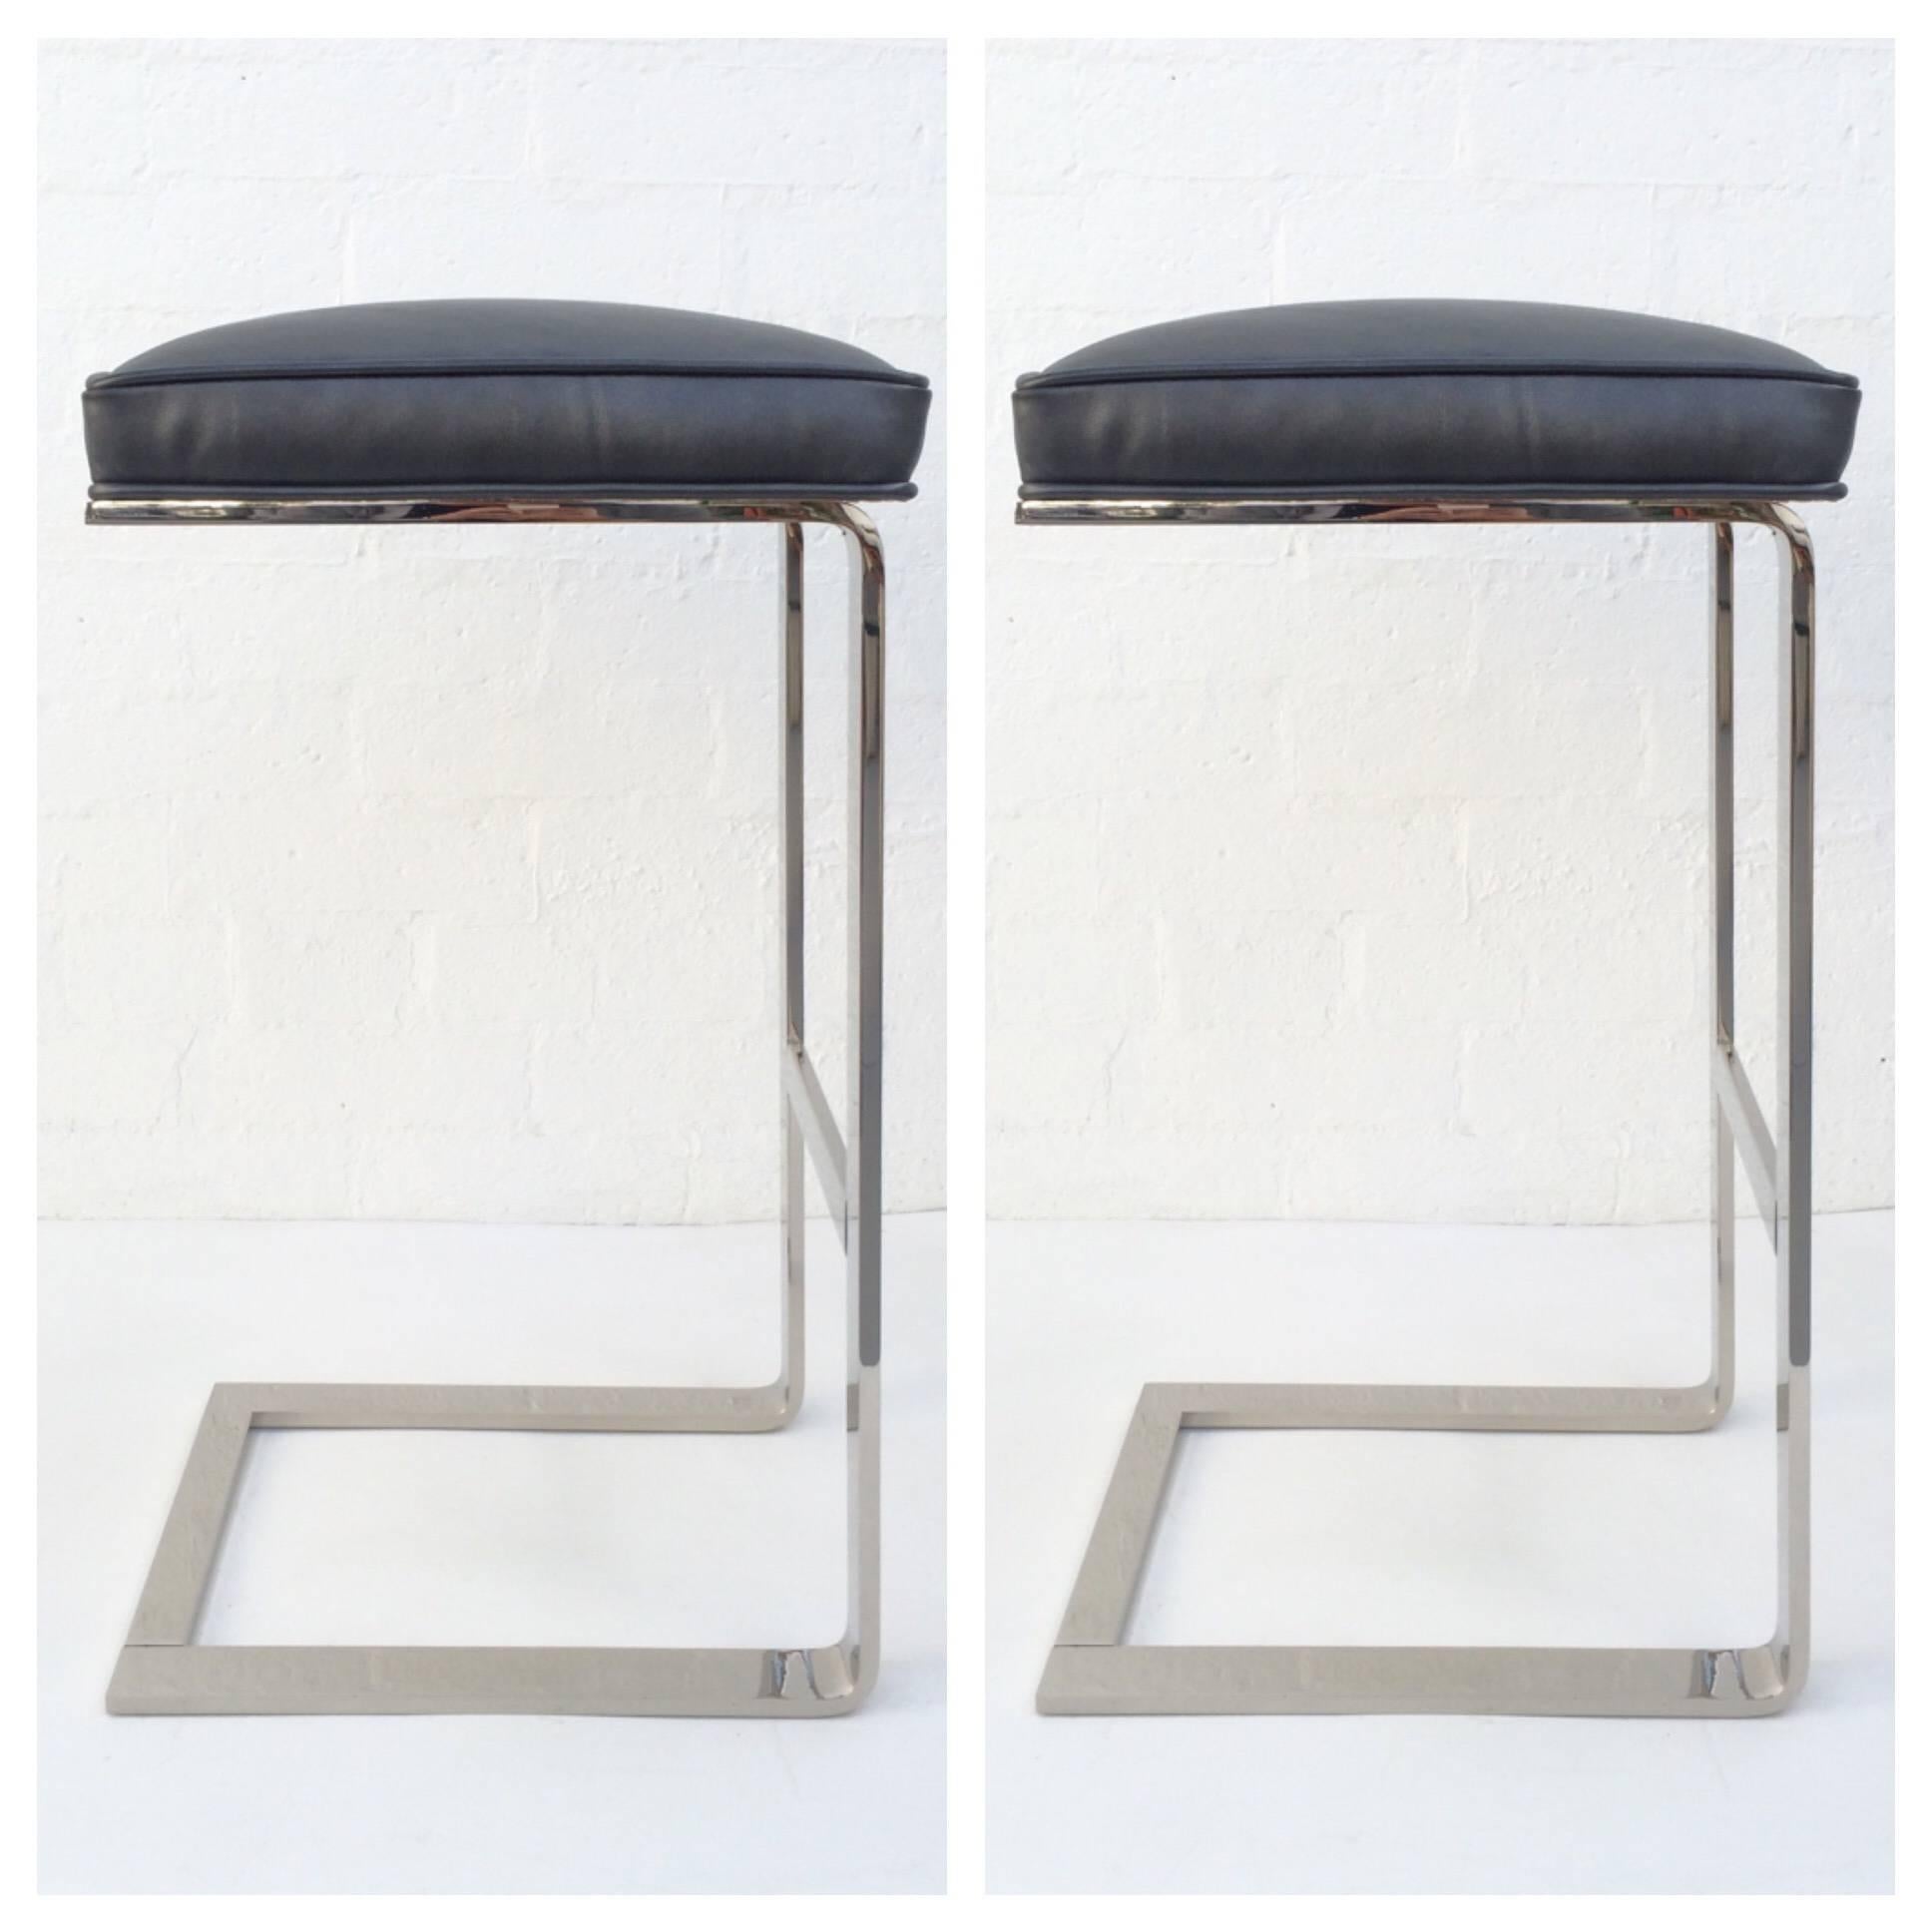 Pair of nickel-plated Barstools designed by Milo Baughman.
Newly re-plated nickel and newly reupholstered in a charcoal gray leather with a slight sliver tone.